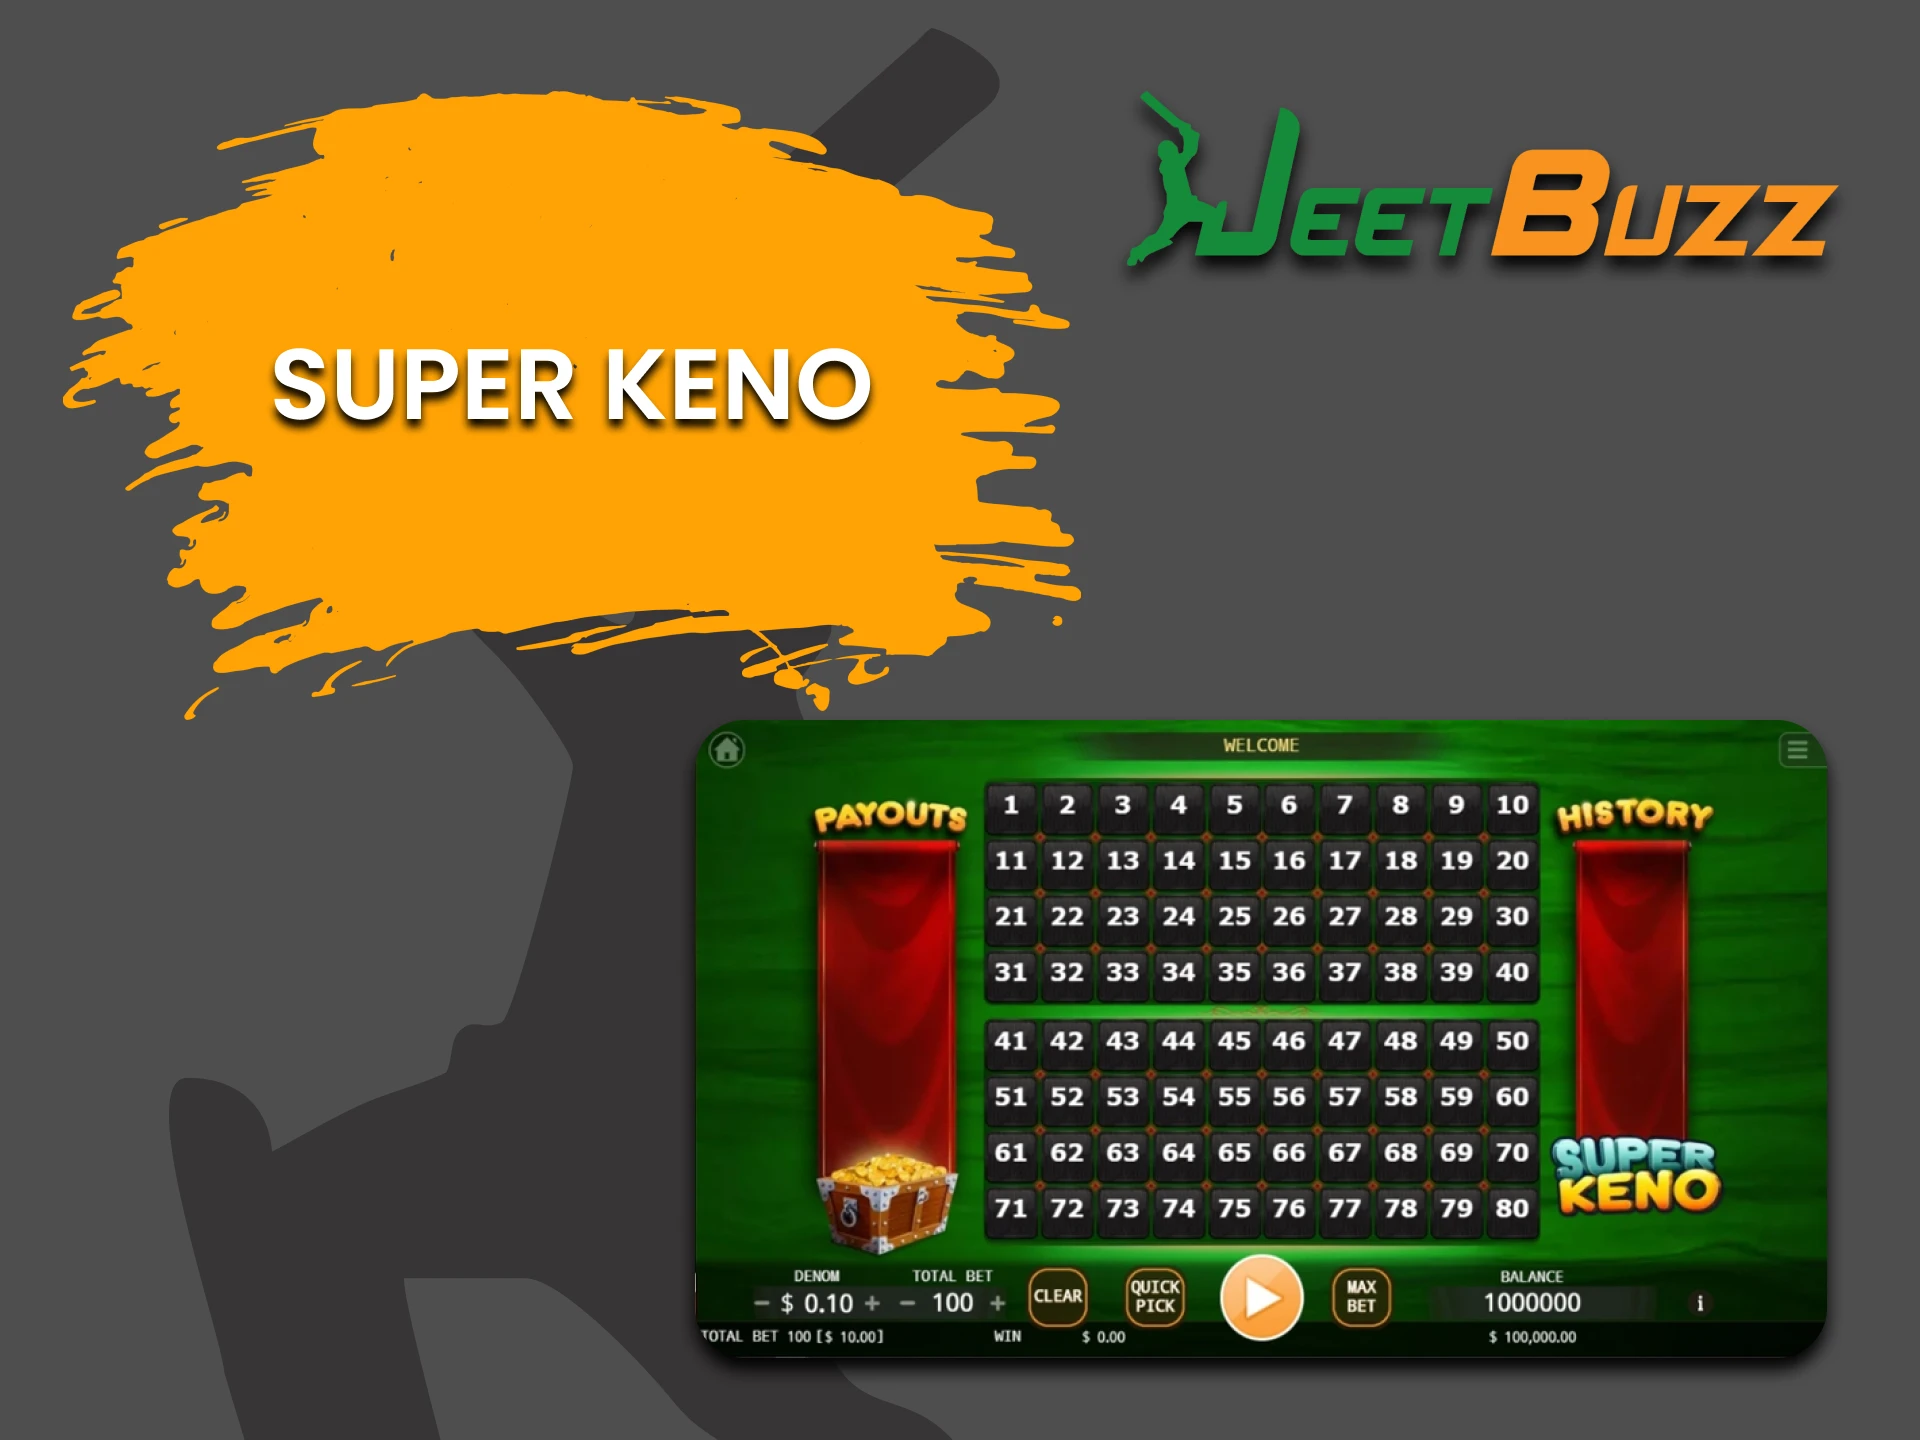 After selecting the Arcade section of JeetBuzz, try playing Super Keno.